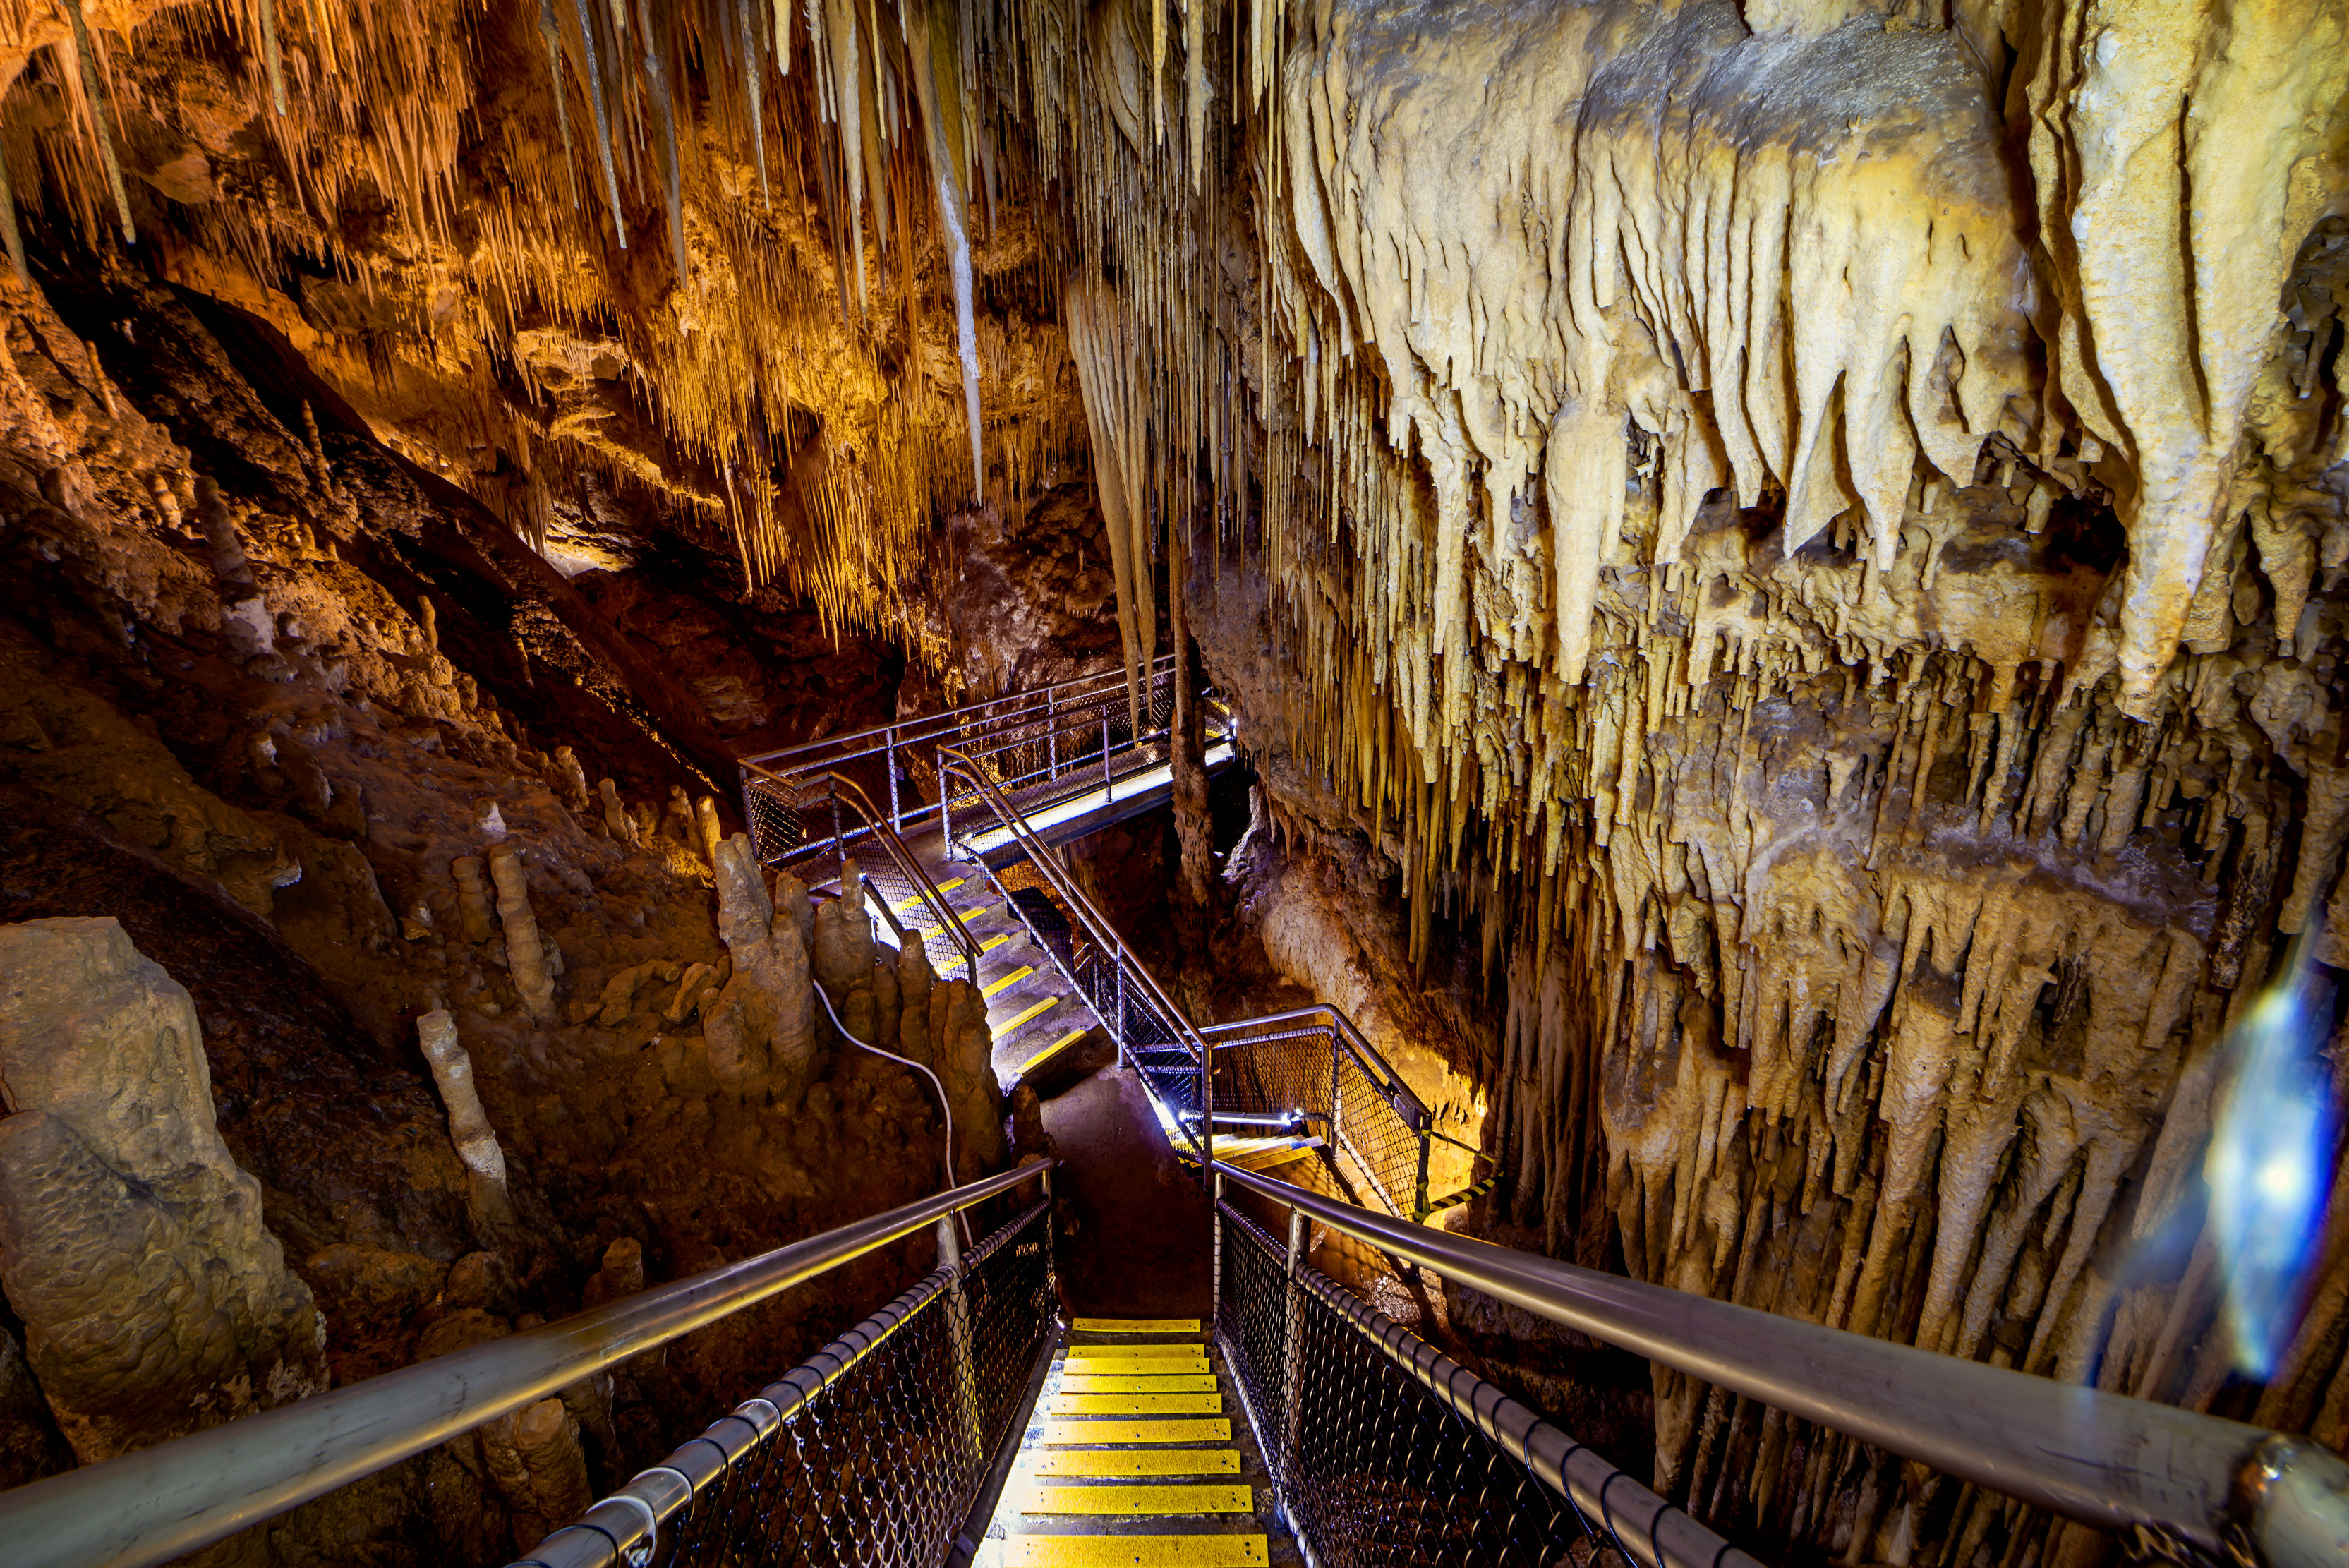 Looking down a steep stair walk into the caverns of the dolomite cave at Hastings Caves and Thermal Springs in the Huon Valley.